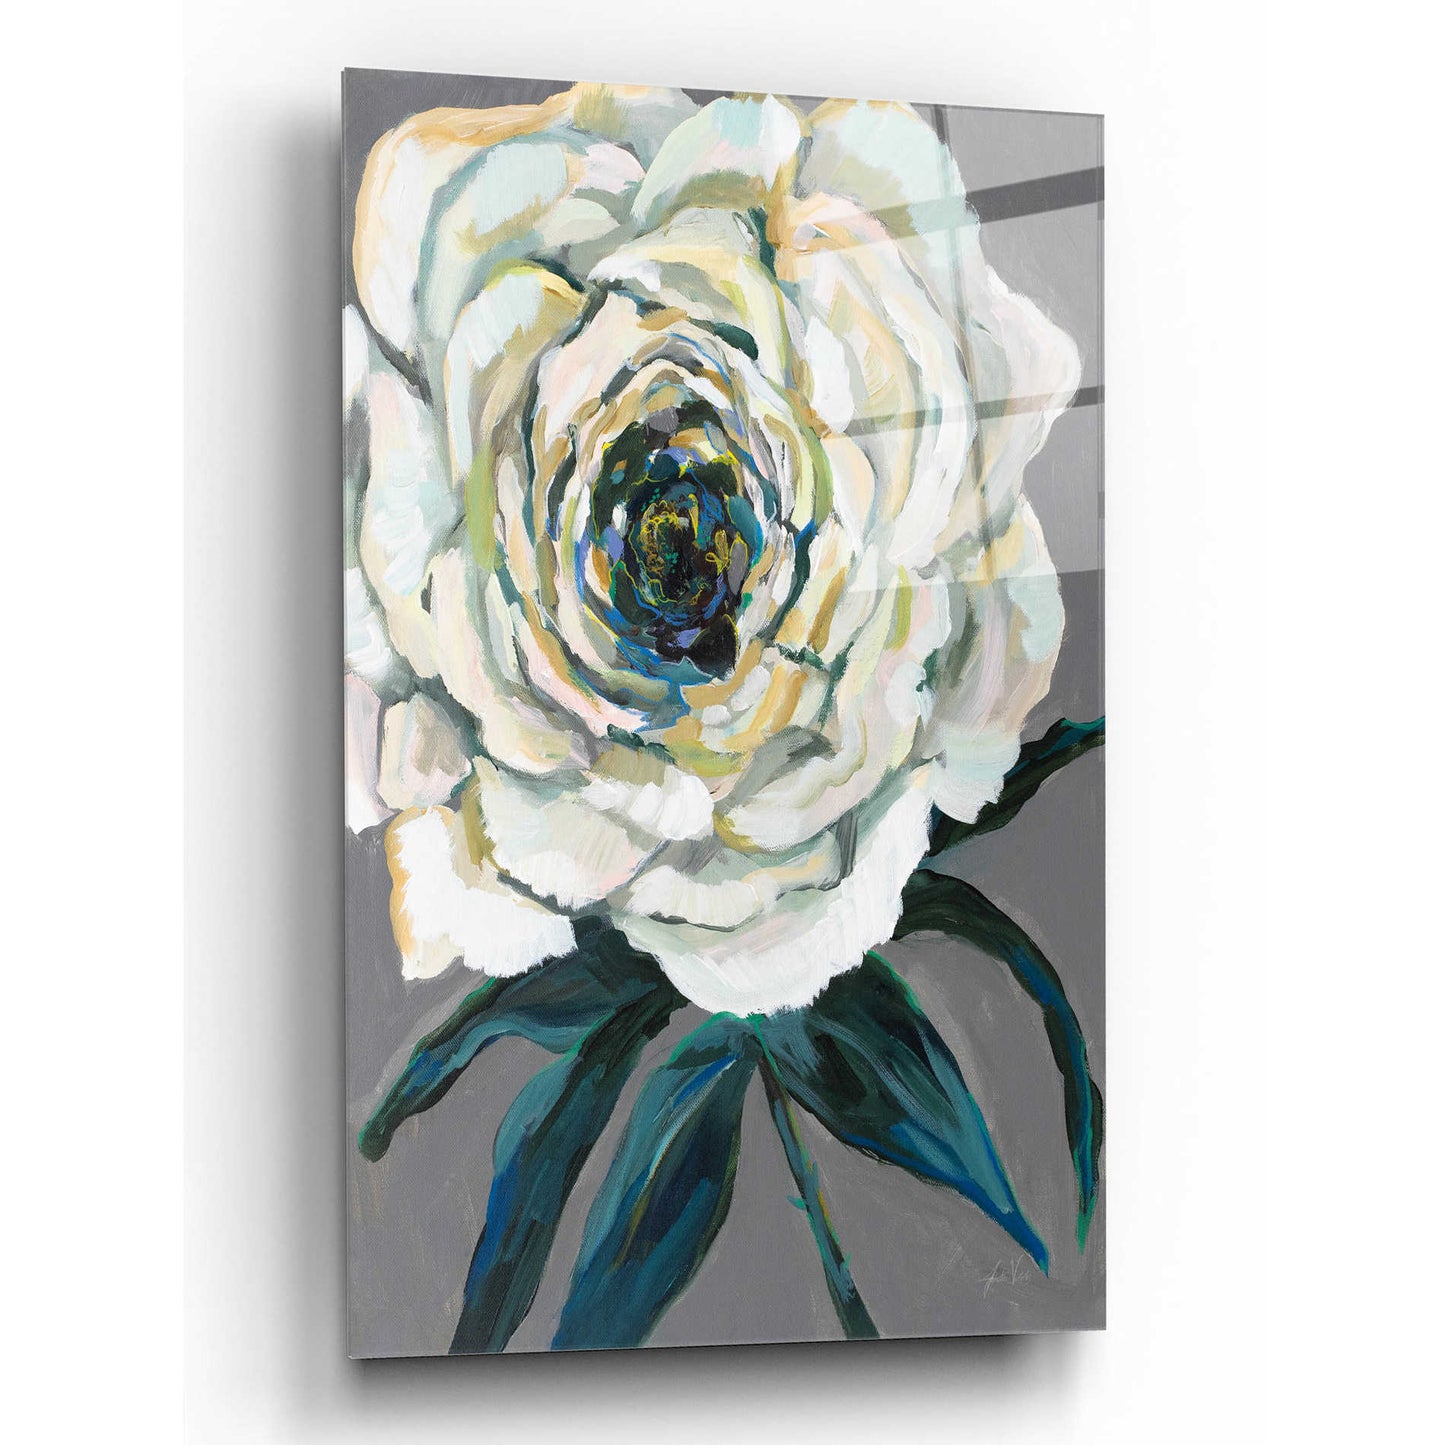 Epic Art 'Rose' by Jeanette Vertentes, Acrylic Glass Wall Art,12x16